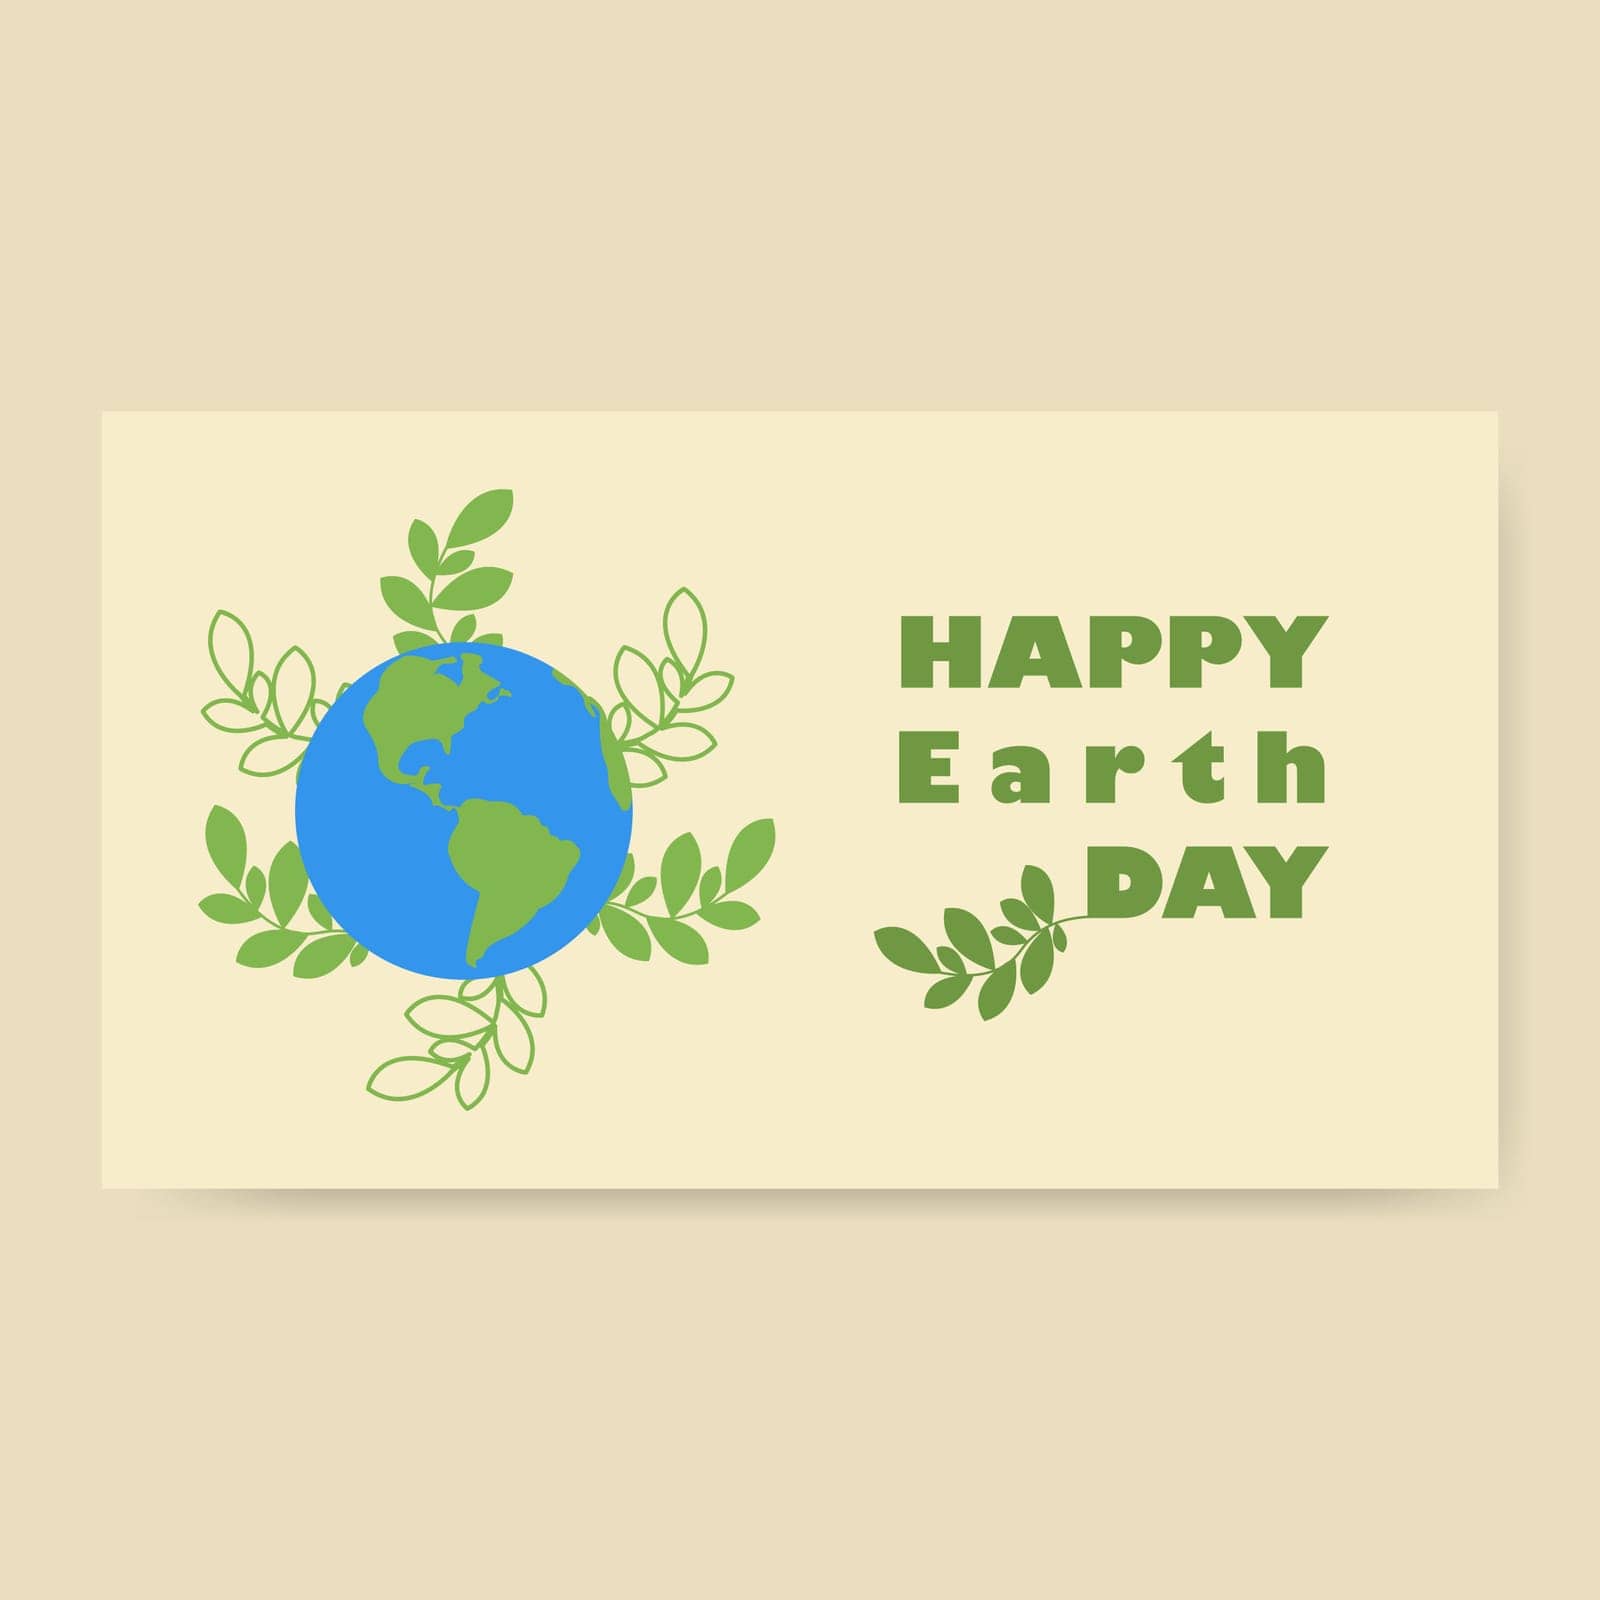 Earth Day flyer card. Earth globe with green leaves. Environmental and environmental protection. Vector illustration